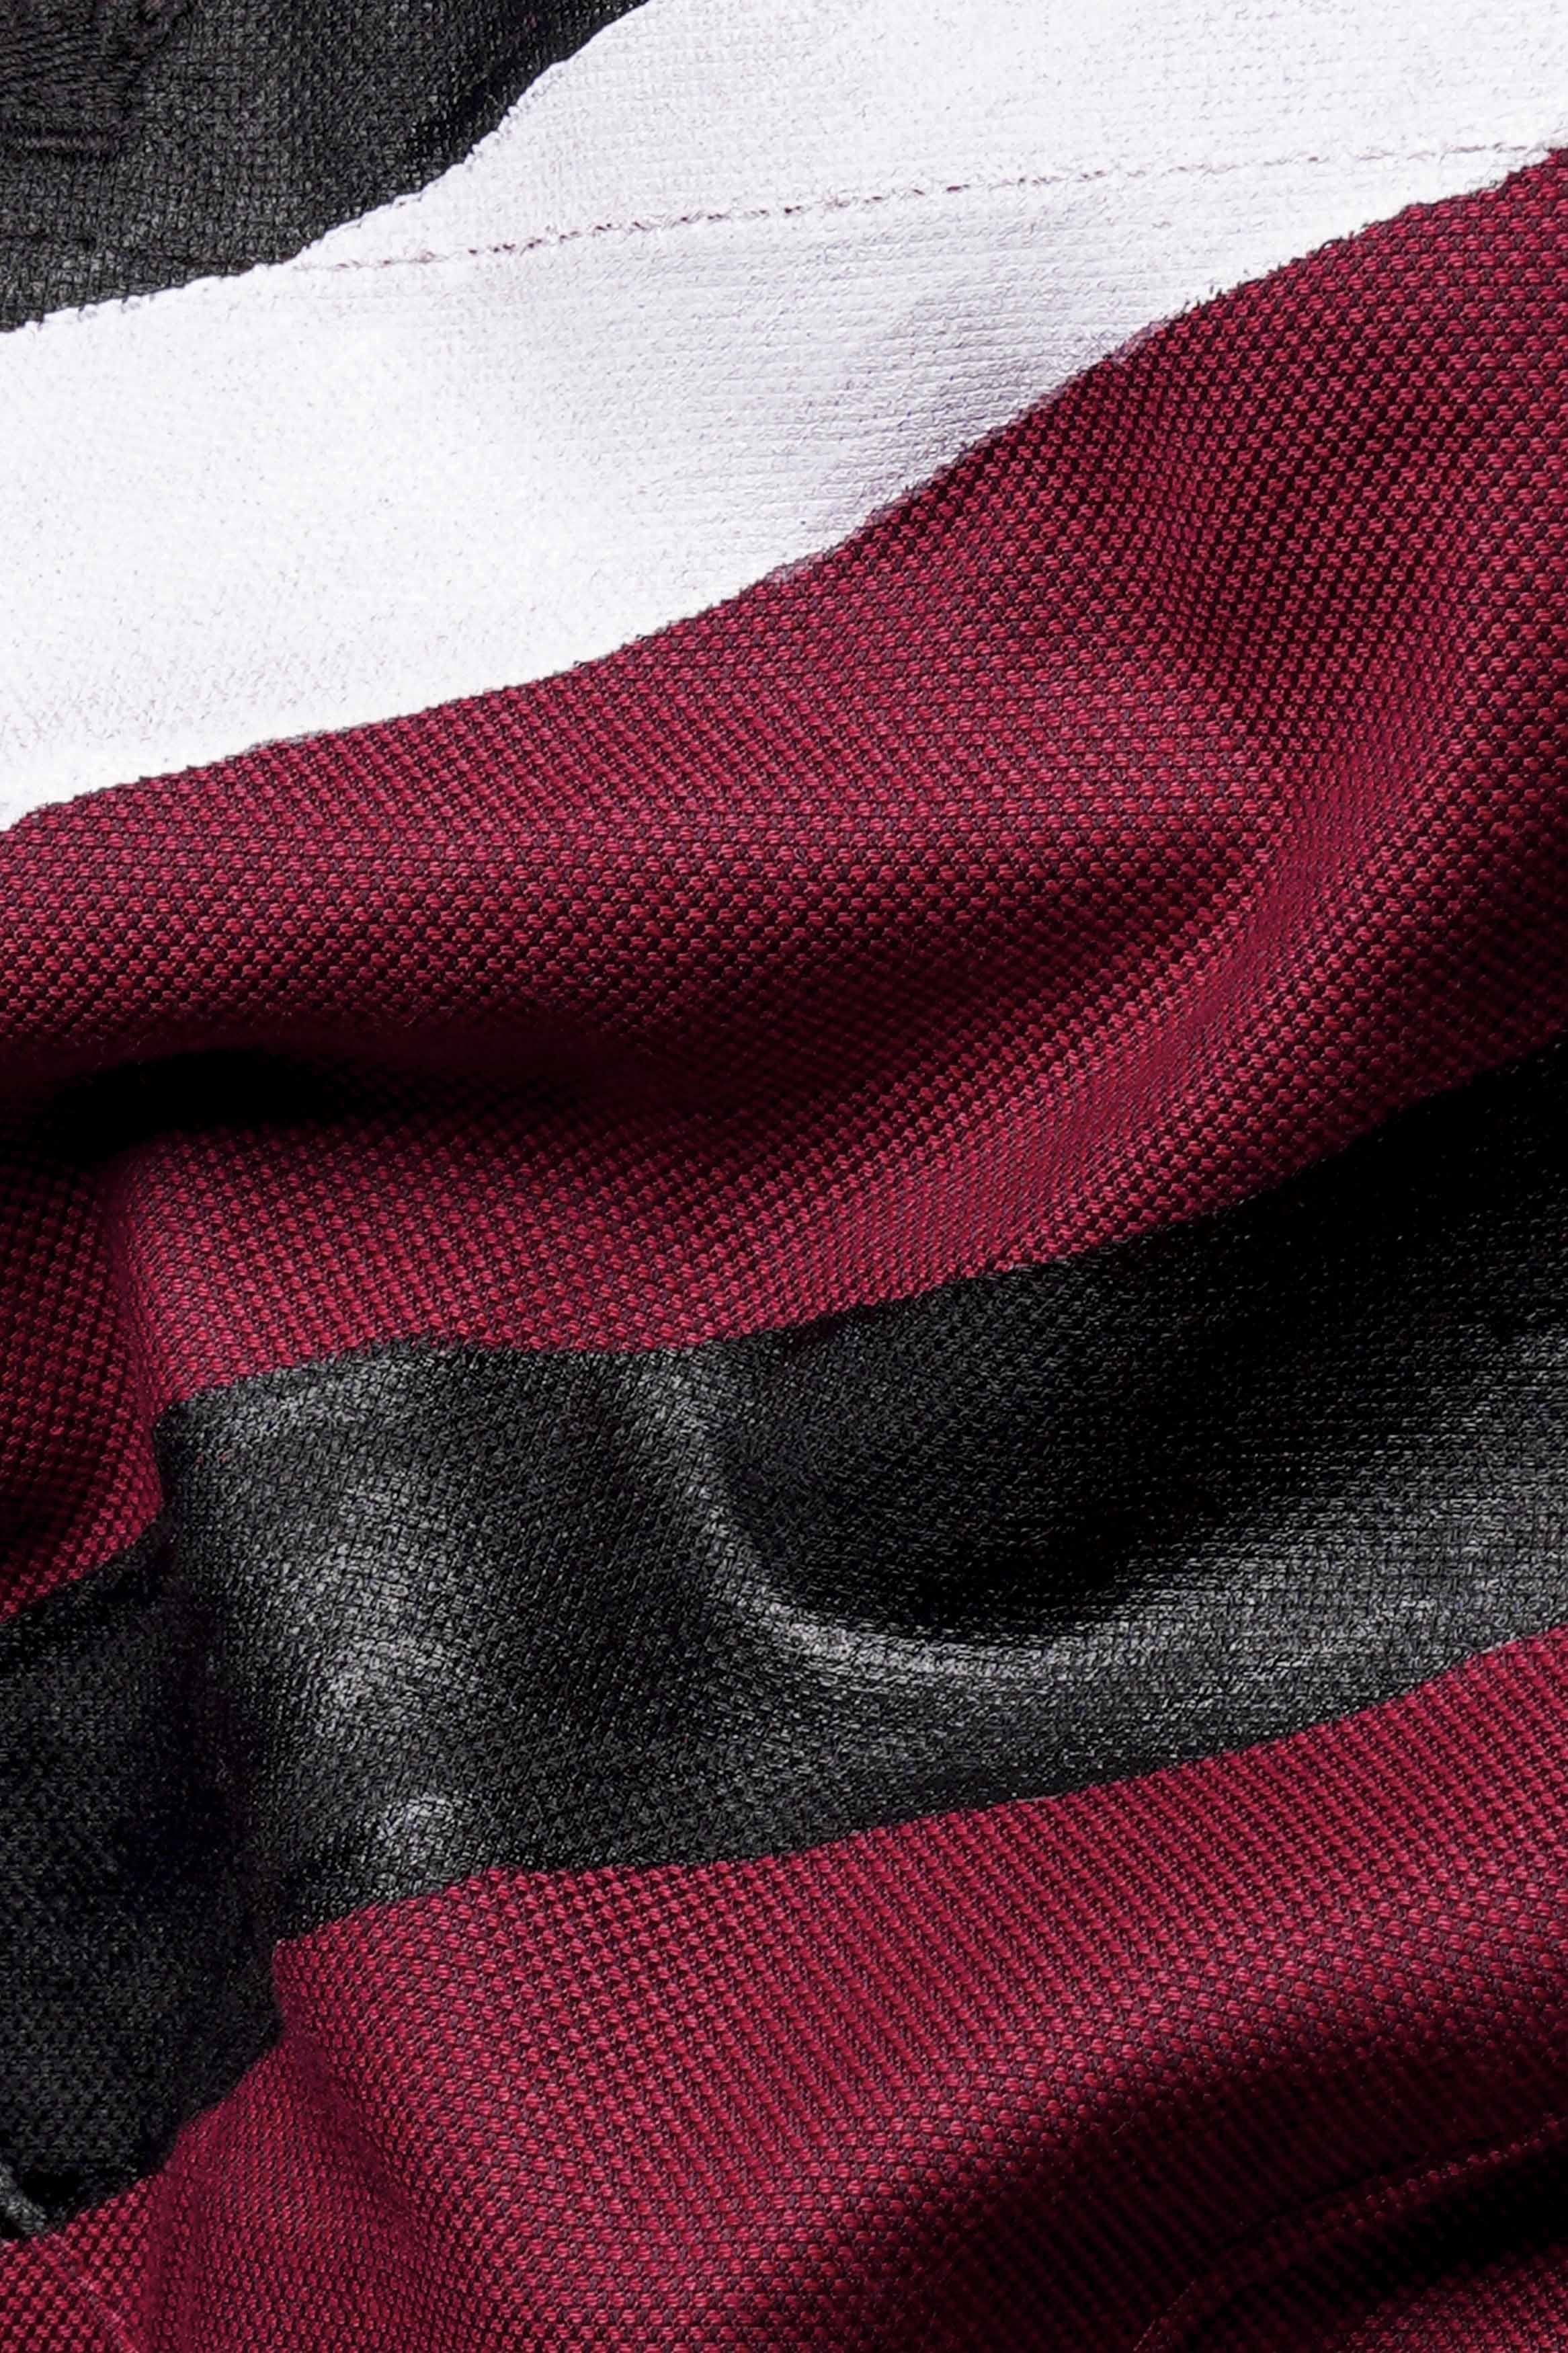 Bordeaux Maroon with Black and White Hand Painted Dobby Premium Giza Cotton Designer Shirt 6682-CA-ART-38, 6682-CA-ART-H-38, 6682-CA-ART-39, 6682-CA-ART-H-39, 6682-CA-ART-40, 6682-CA-ART-H-40, 6682-CA-ART-42, 6682-CA-ART-H-42, 6682-CA-ART-44, 6682-CA-ART-H-44, 6682-CA-ART-46, 6682-CA-ART-H-46, 6682-CA-ART-48, 6682-CA-ART-H-48, 6682-CA-ART-50, 6682-CA-ART-H-50, 6682-CA-ART-52, 6682-CA-ART-H-52